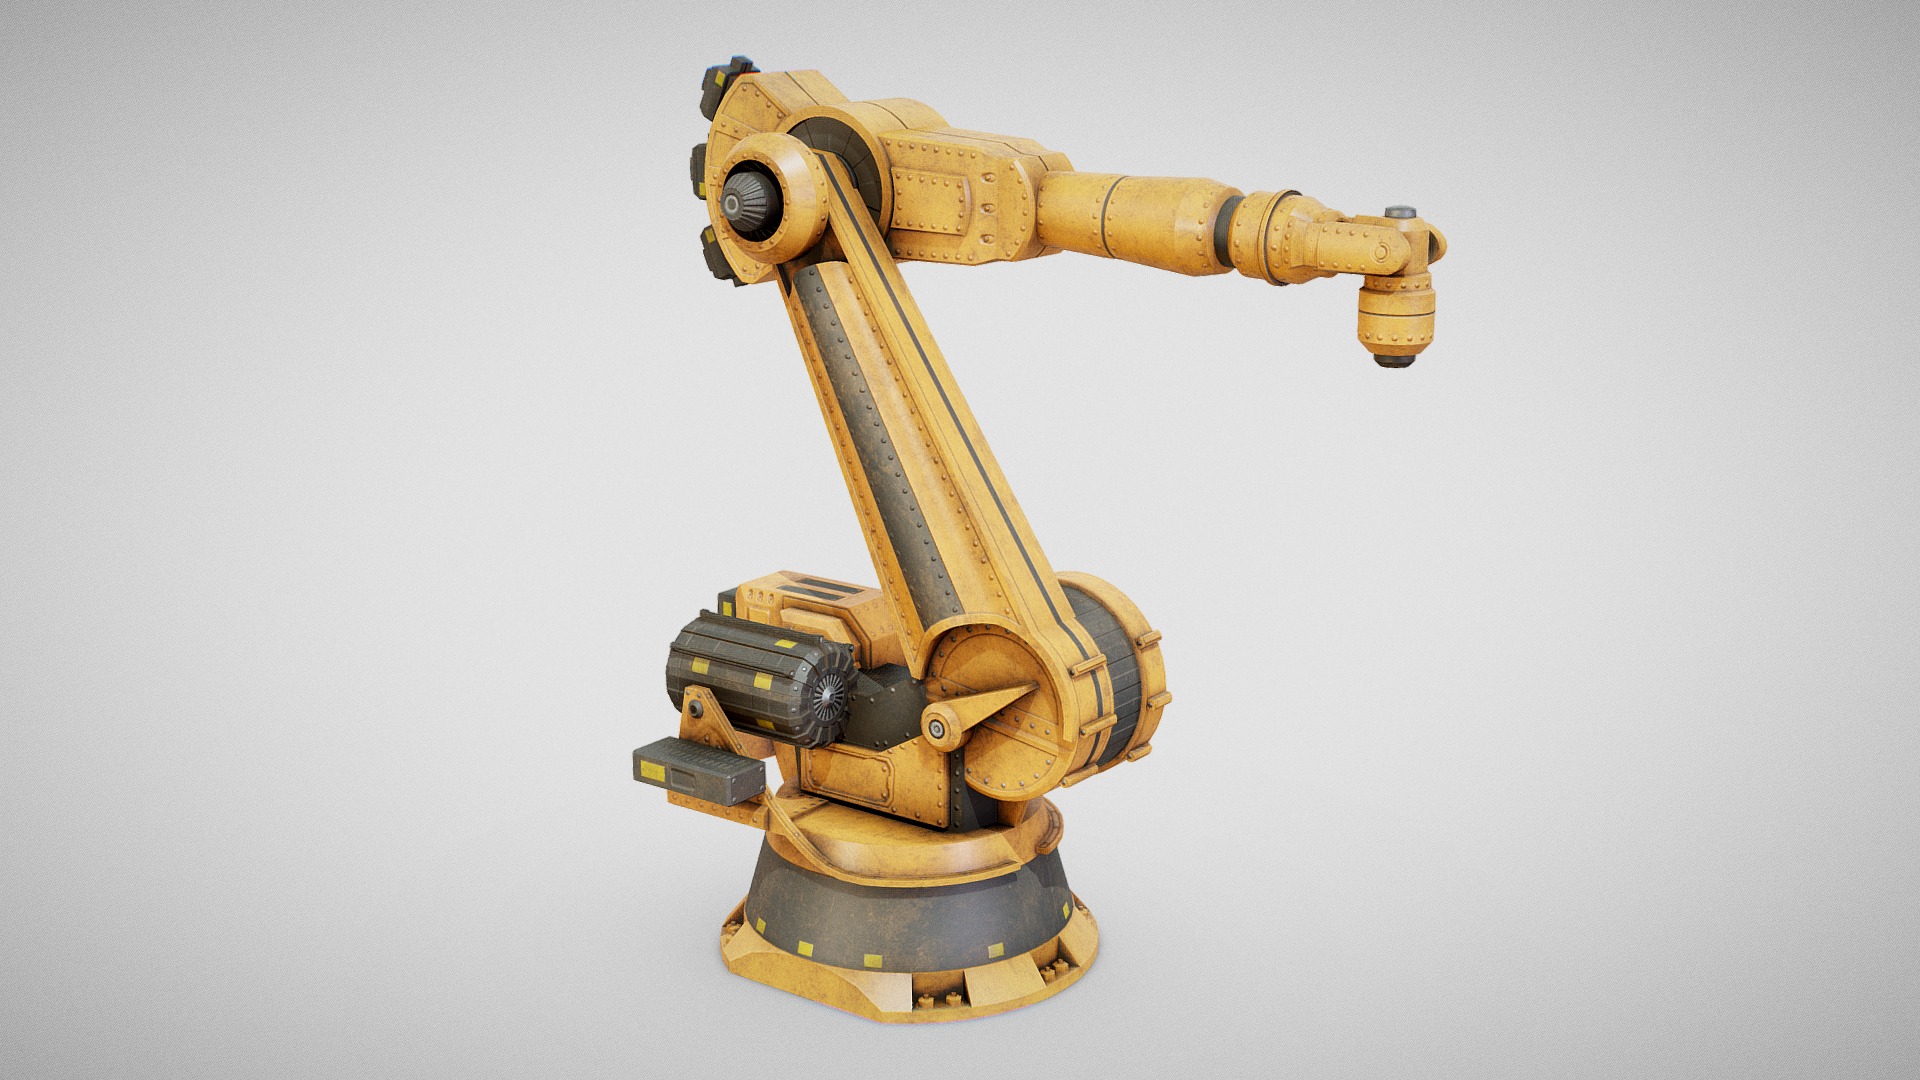 3D model Industrial Robot Arm 01 (Dirty) - This is a 3D model of the Industrial Robot Arm 01 (Dirty). The 3D model is about a metal object with a handle.